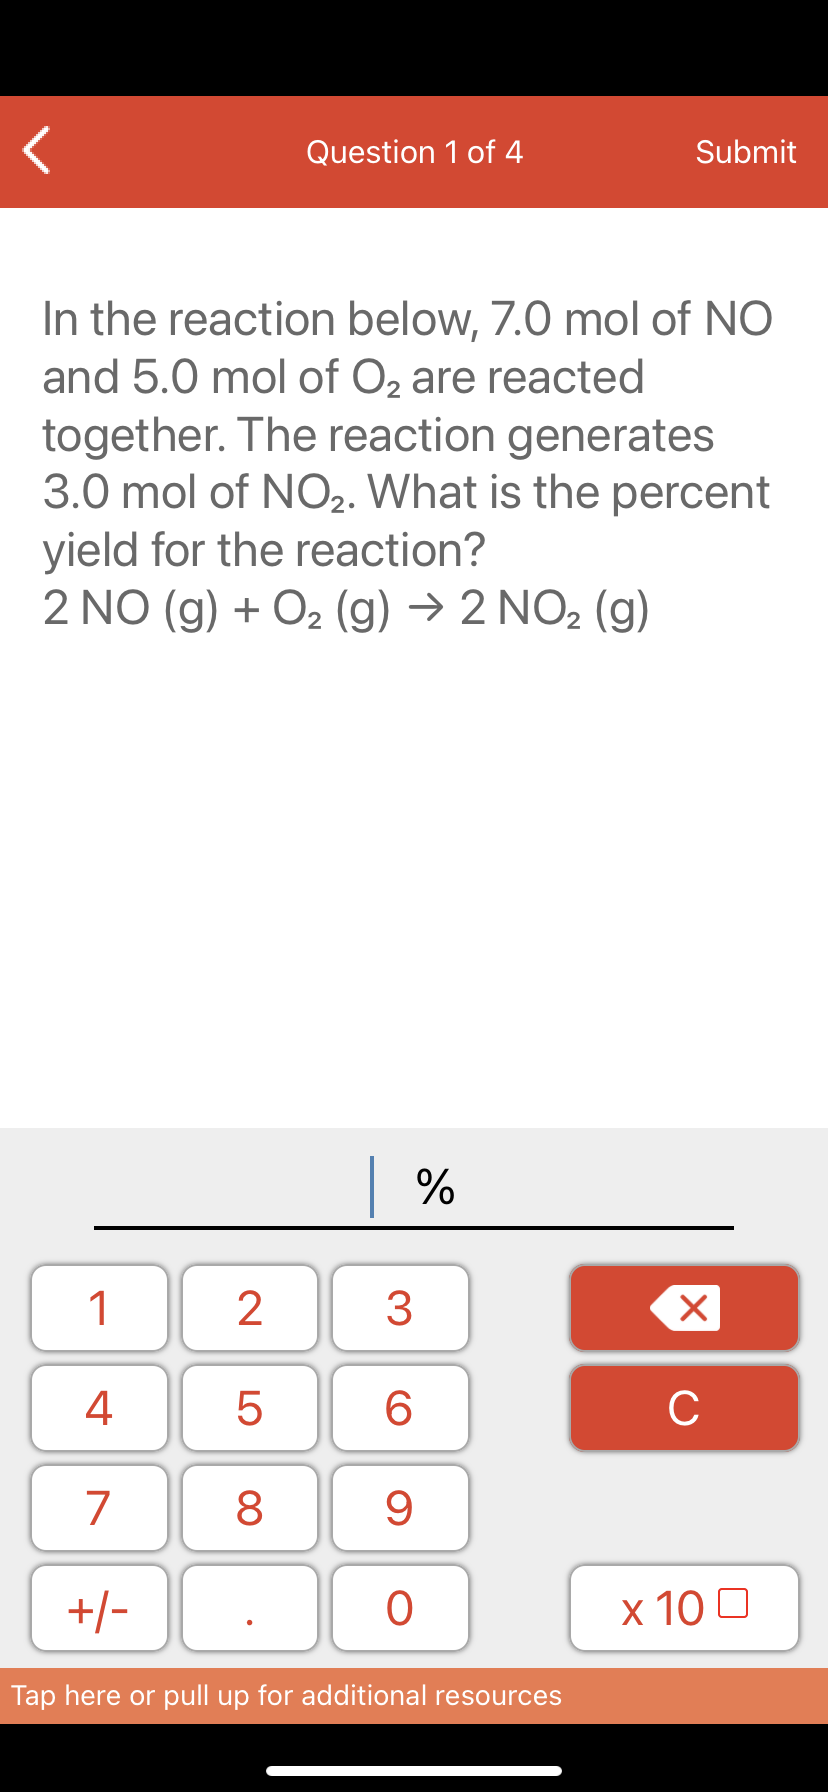 Question 1 of 4
Submit
In the reaction below, 7.0 mol of NO
and 5.0 mol of O, are reacted
together. The reaction generates
3.0 mol of NO2. What is the percent
yield for the reaction?
2 NO (g) + O2 (g) → 2 NO2 (g)
| %
1
3
4
6.
C
7
9.
+/-
x 10 0
Tap here or pull up for additional resources
LO
00
